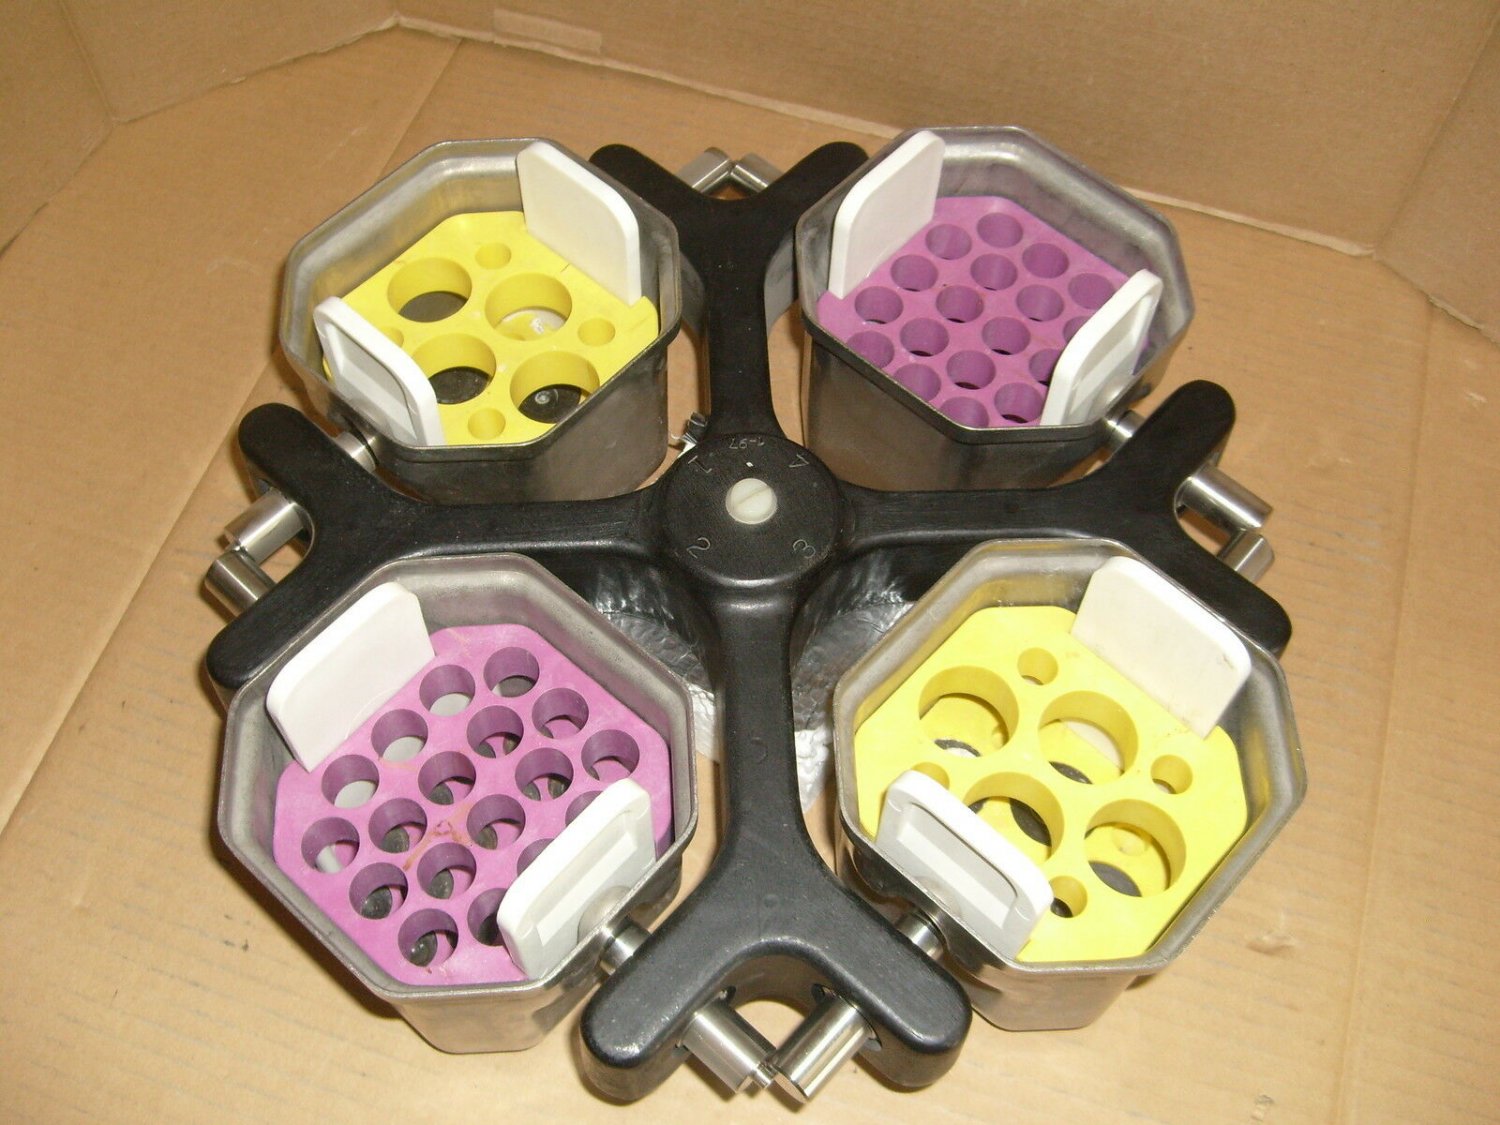 Beckman TH-4 Rotor Swing Bucket for TJ-6 Centrifuge Purple / Yellow Inserts TH4